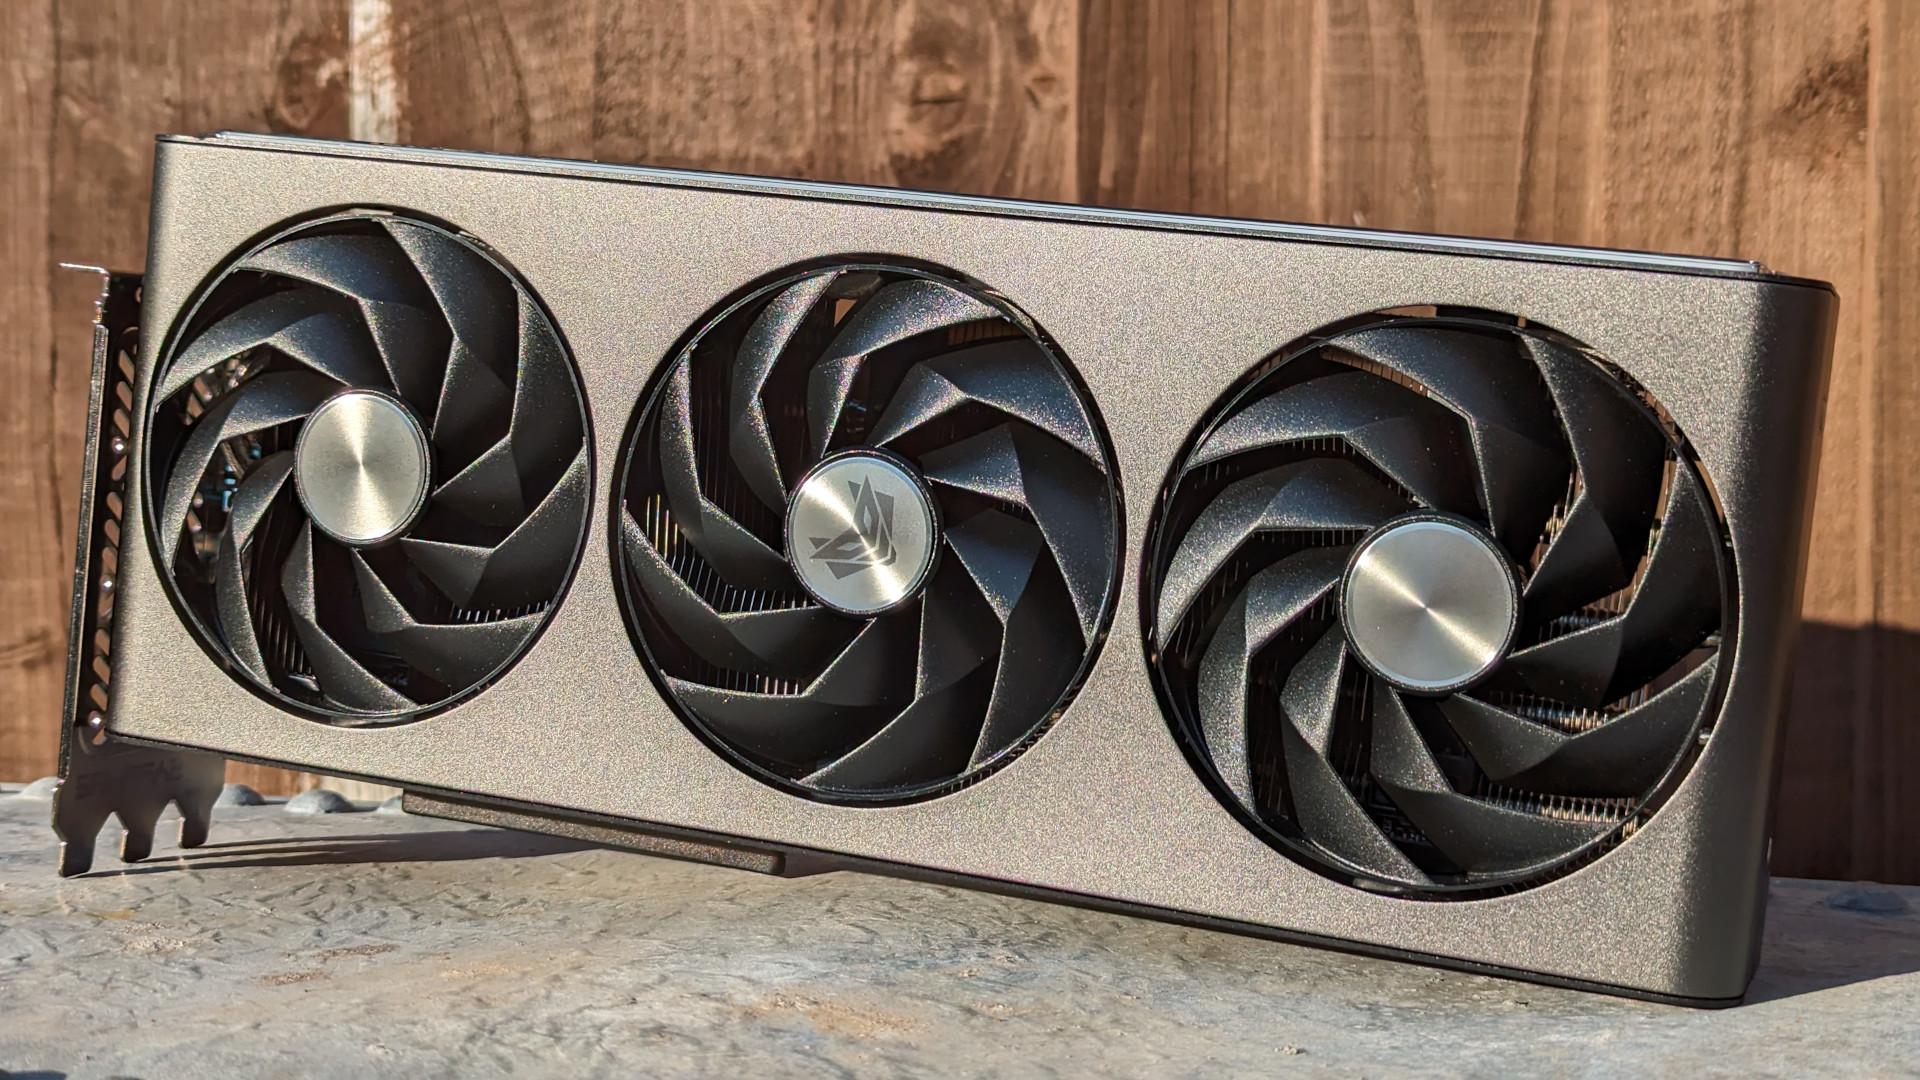 AMD Radeon RX 6800 XT Reviews, Pros and Cons